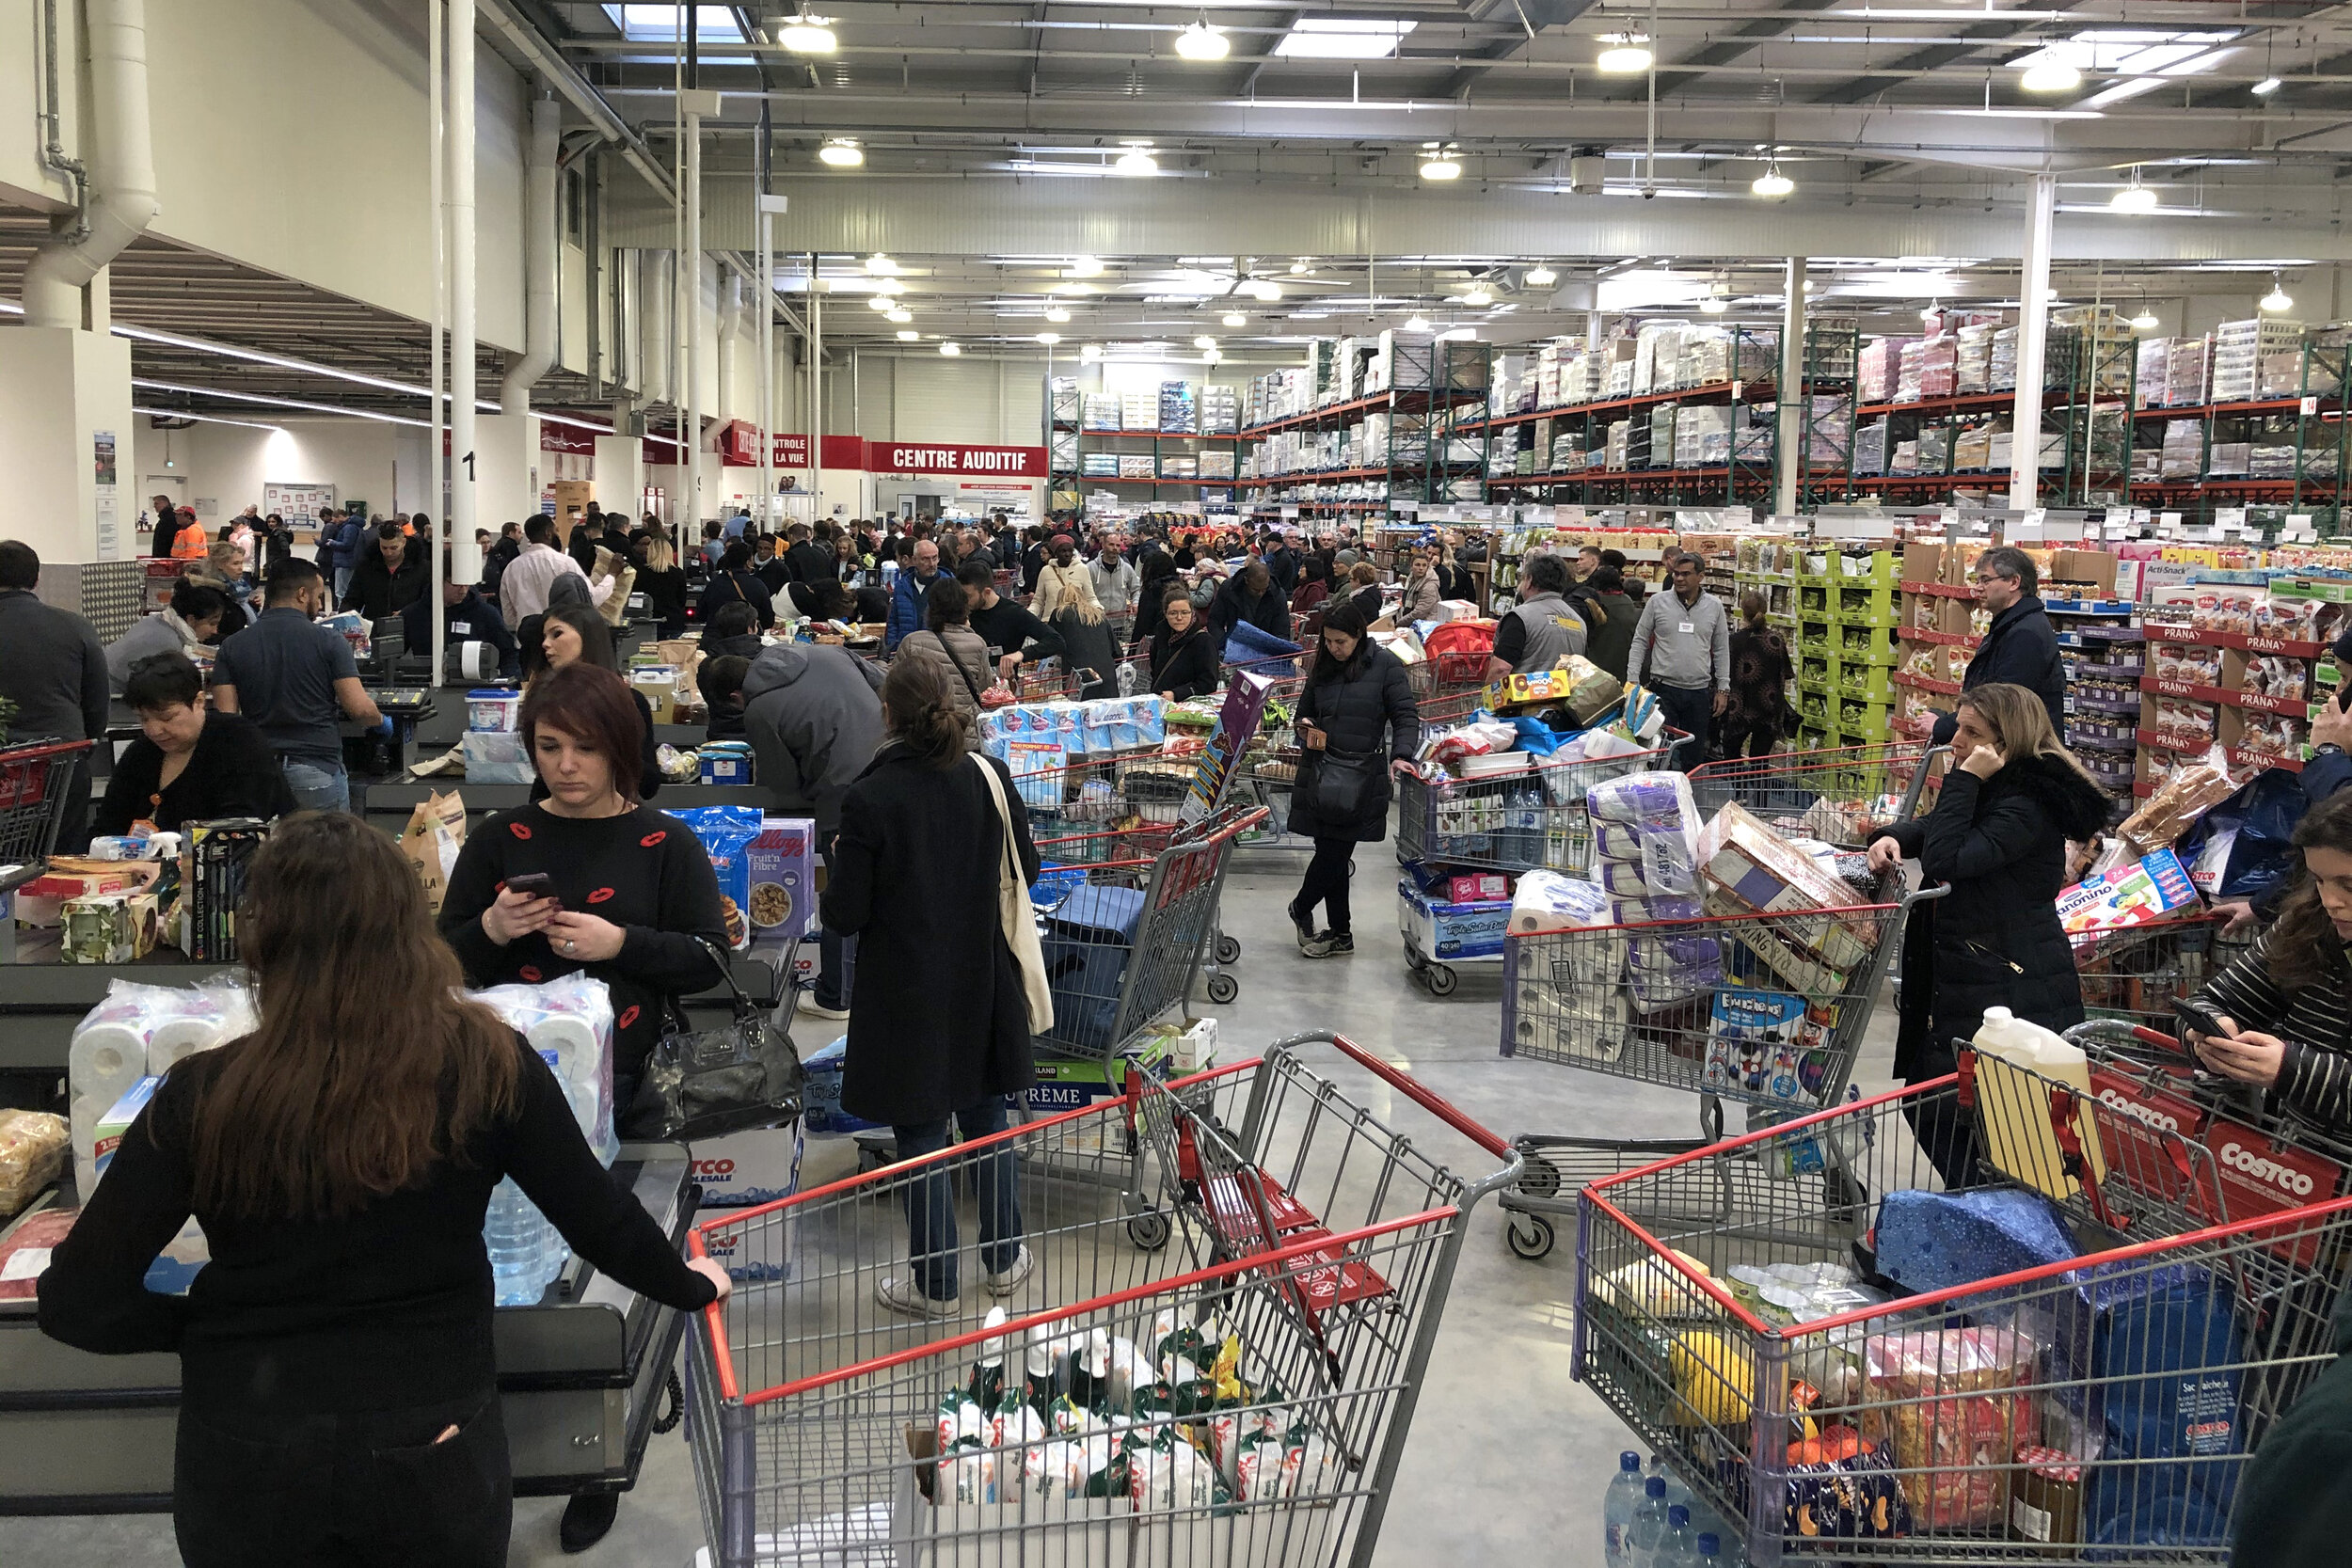   © Vincent Isoré/IP3 ; Paris, France March 13, 2020 - After the announcement of the closure of schools due to coronavirus, in a supermarket.  